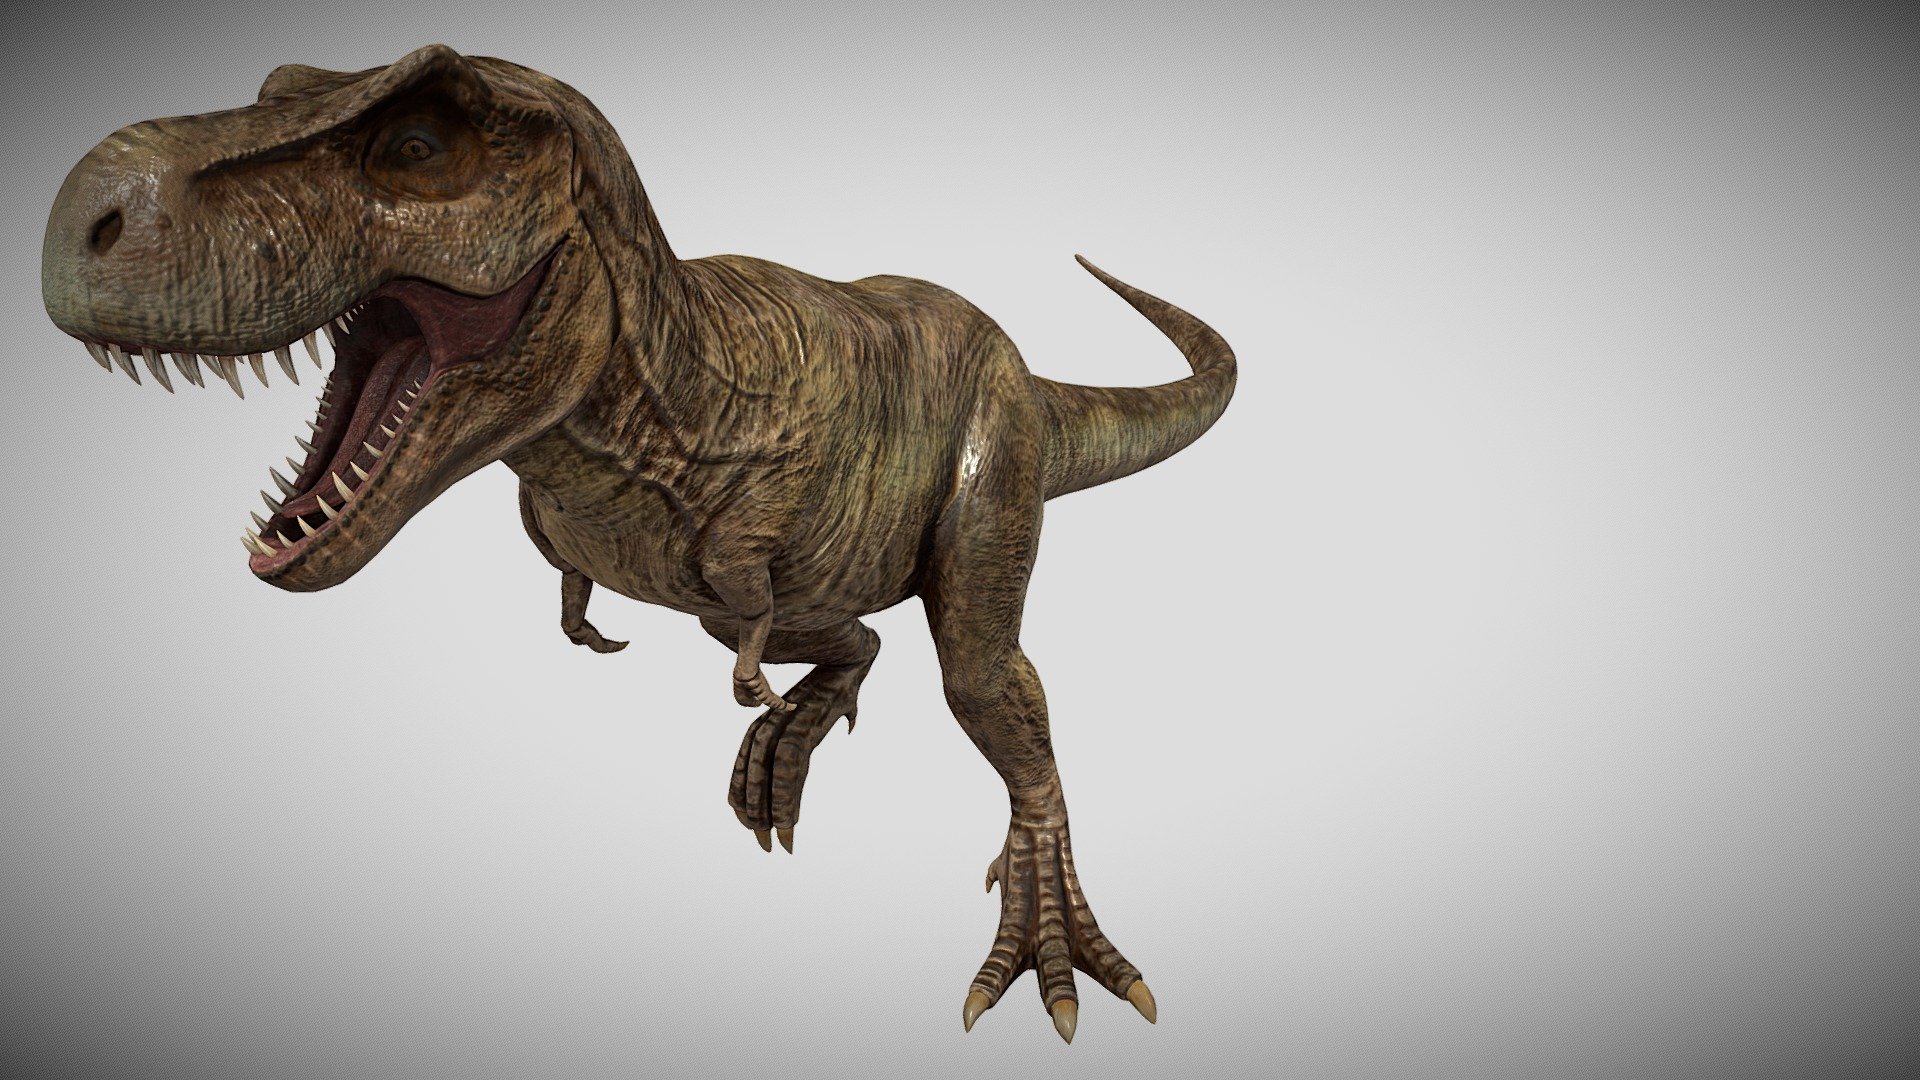 Tyrannosaurus rex was one of the most ferocious predators to ever walk the Earth. With a massive body, sharp teeth, and jaws so powerful they could crush a car, this famous carnivore dominated the forested river valleys in western North America during the late Cretaceous period, 68 million years ago 3d model